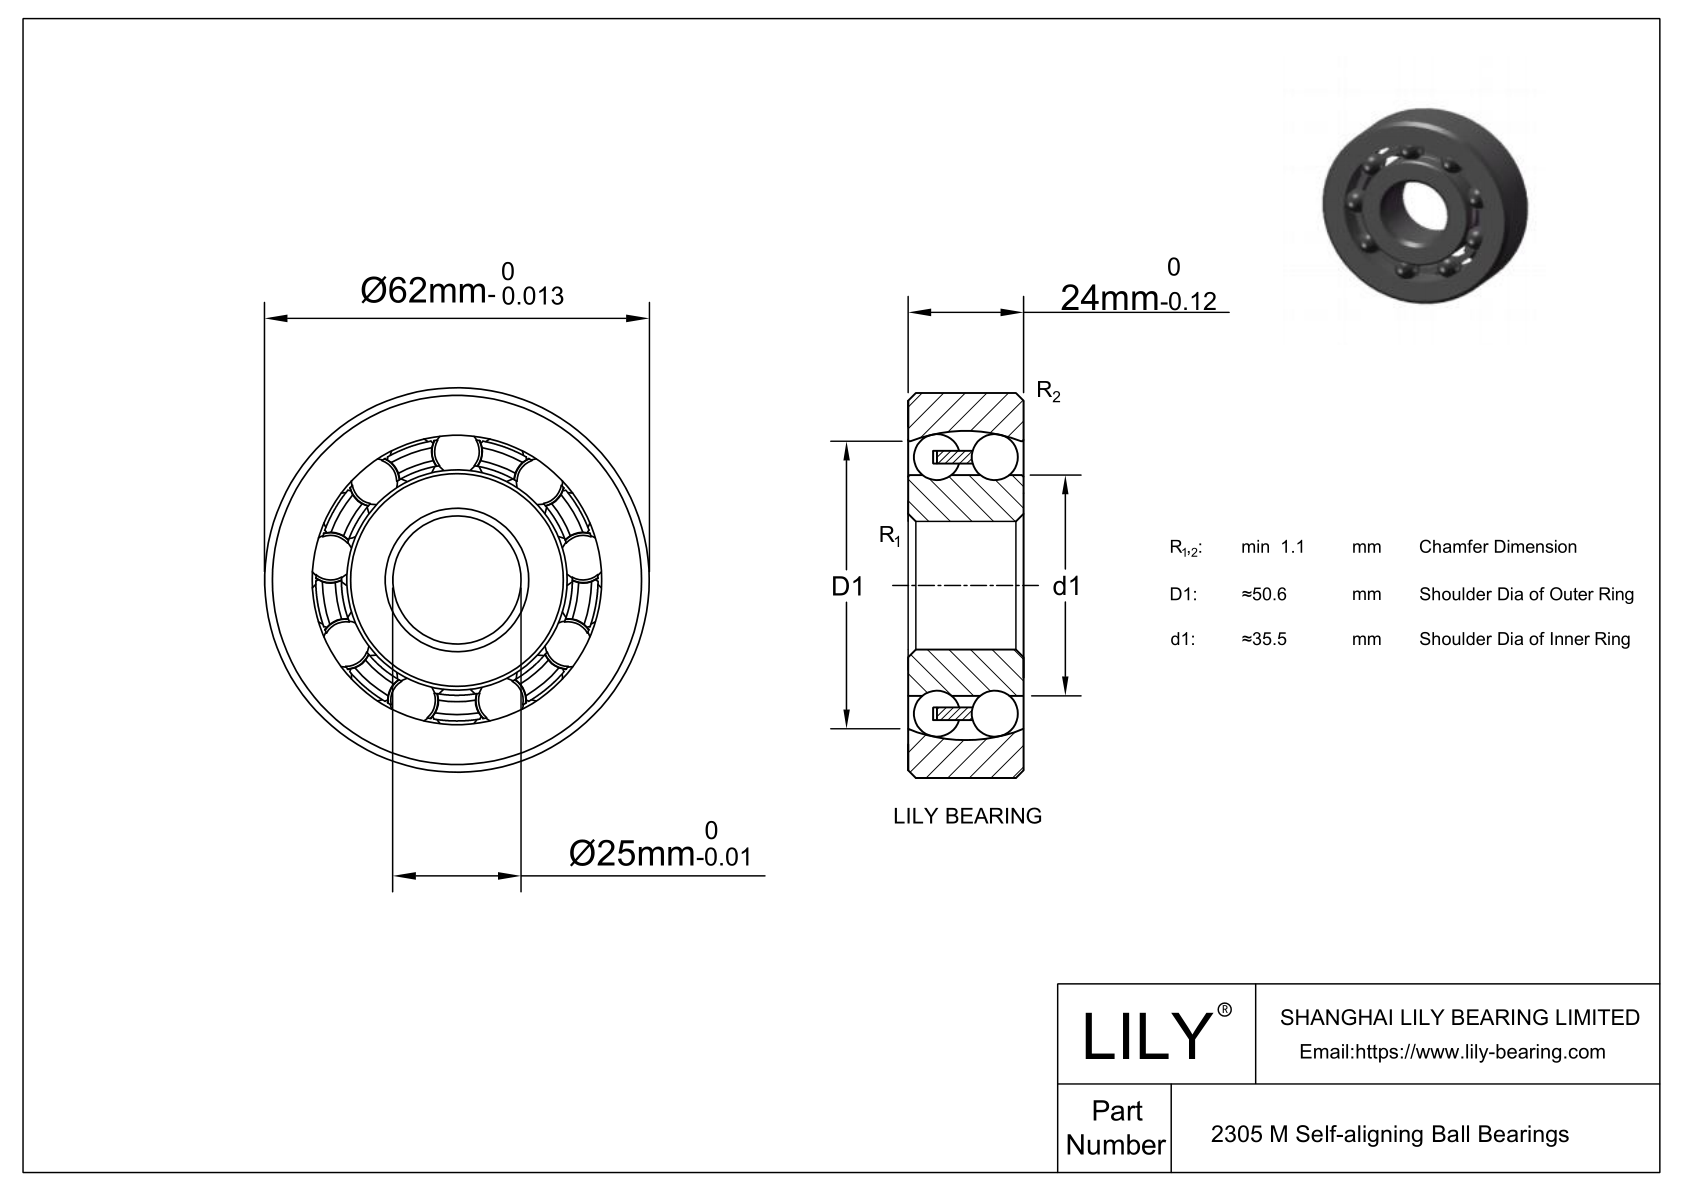 S2305 M Stainless Steel Self Aligning Ball Bearings cad drawing